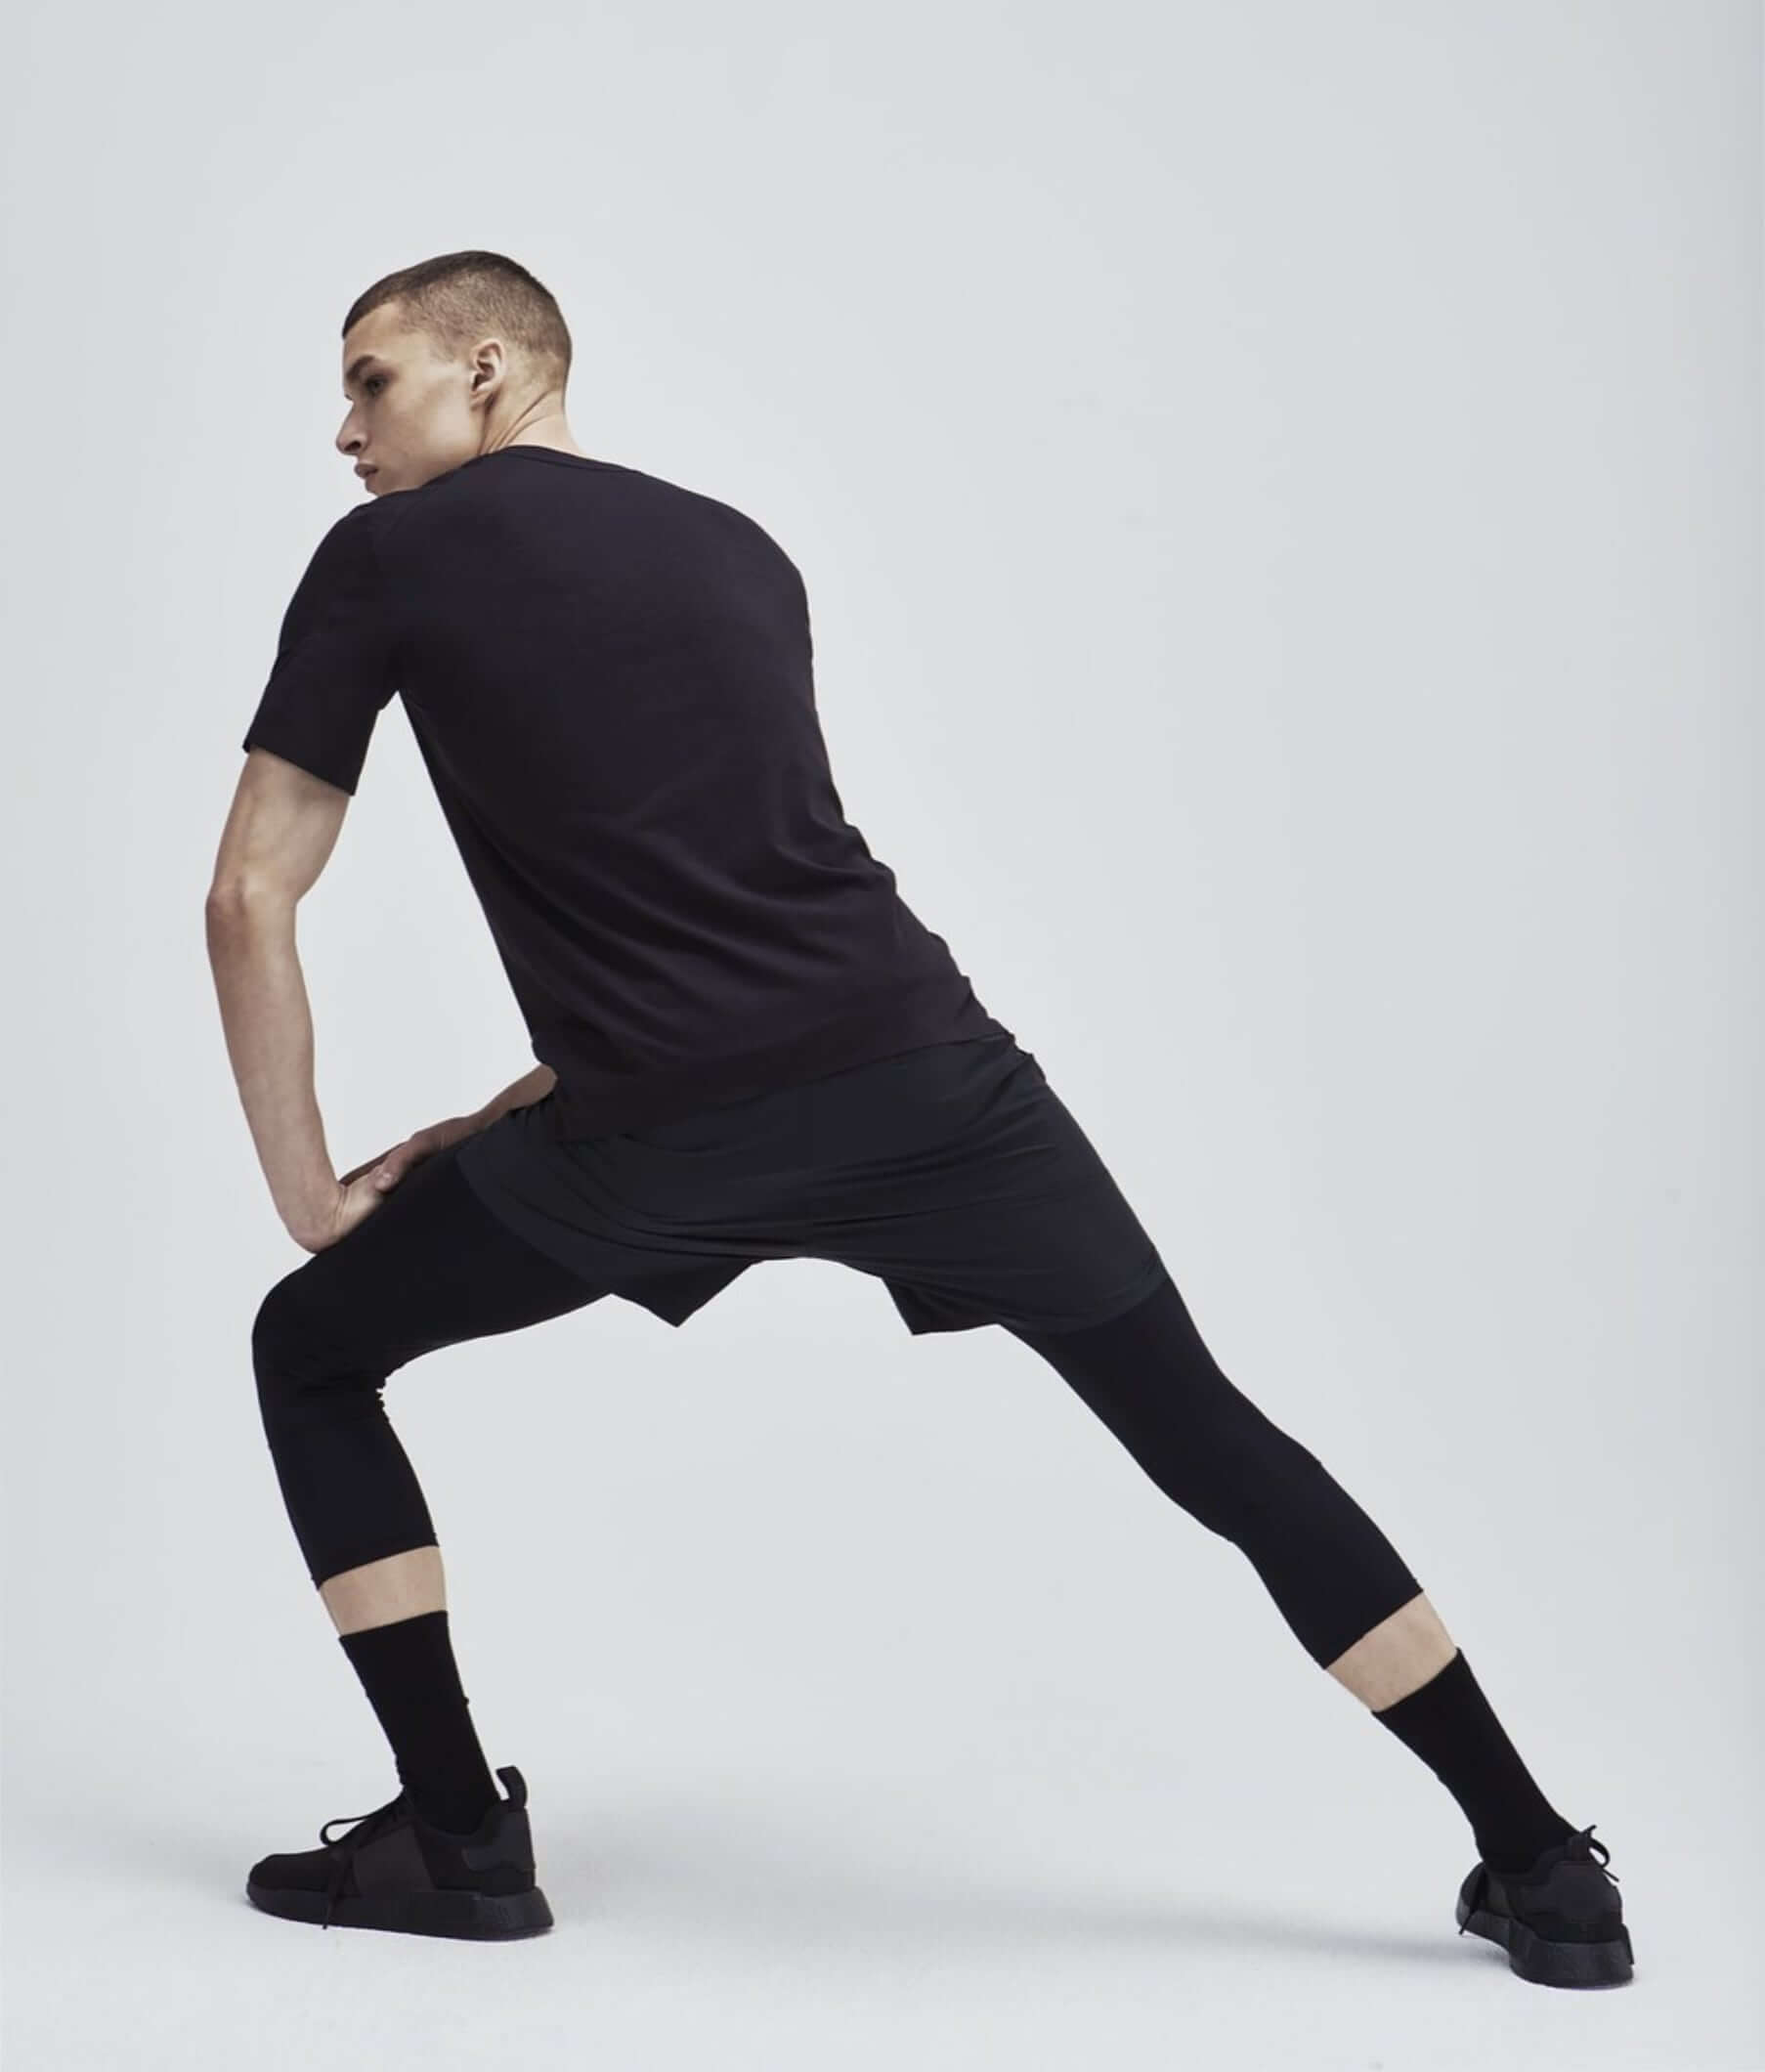 Best New Workout Gear for Men in 2021 | Valet.